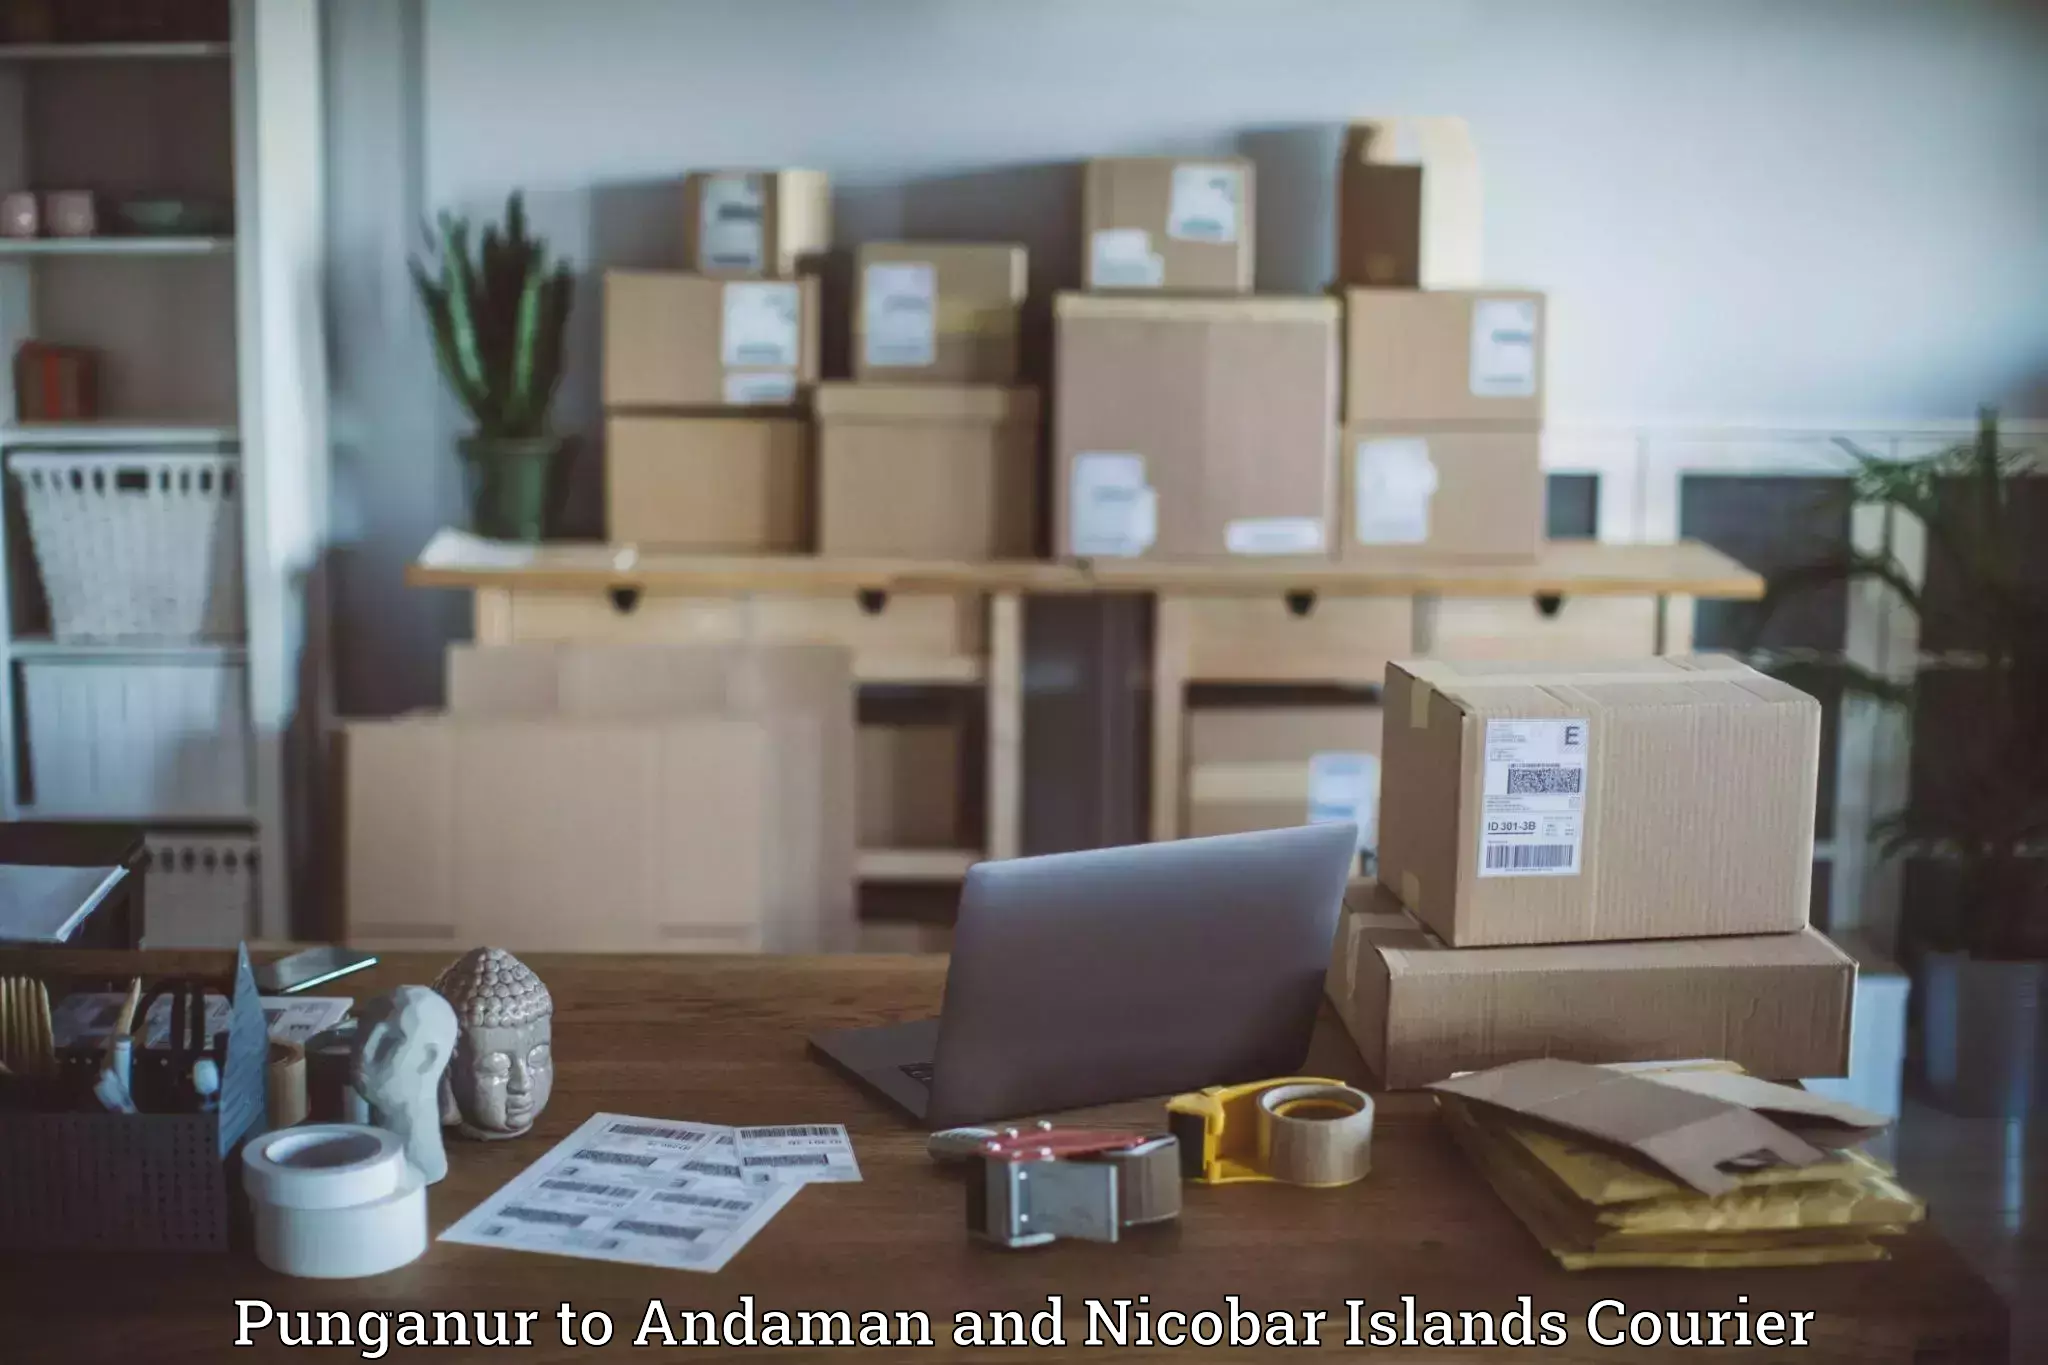 Online package tracking Punganur to Andaman and Nicobar Islands